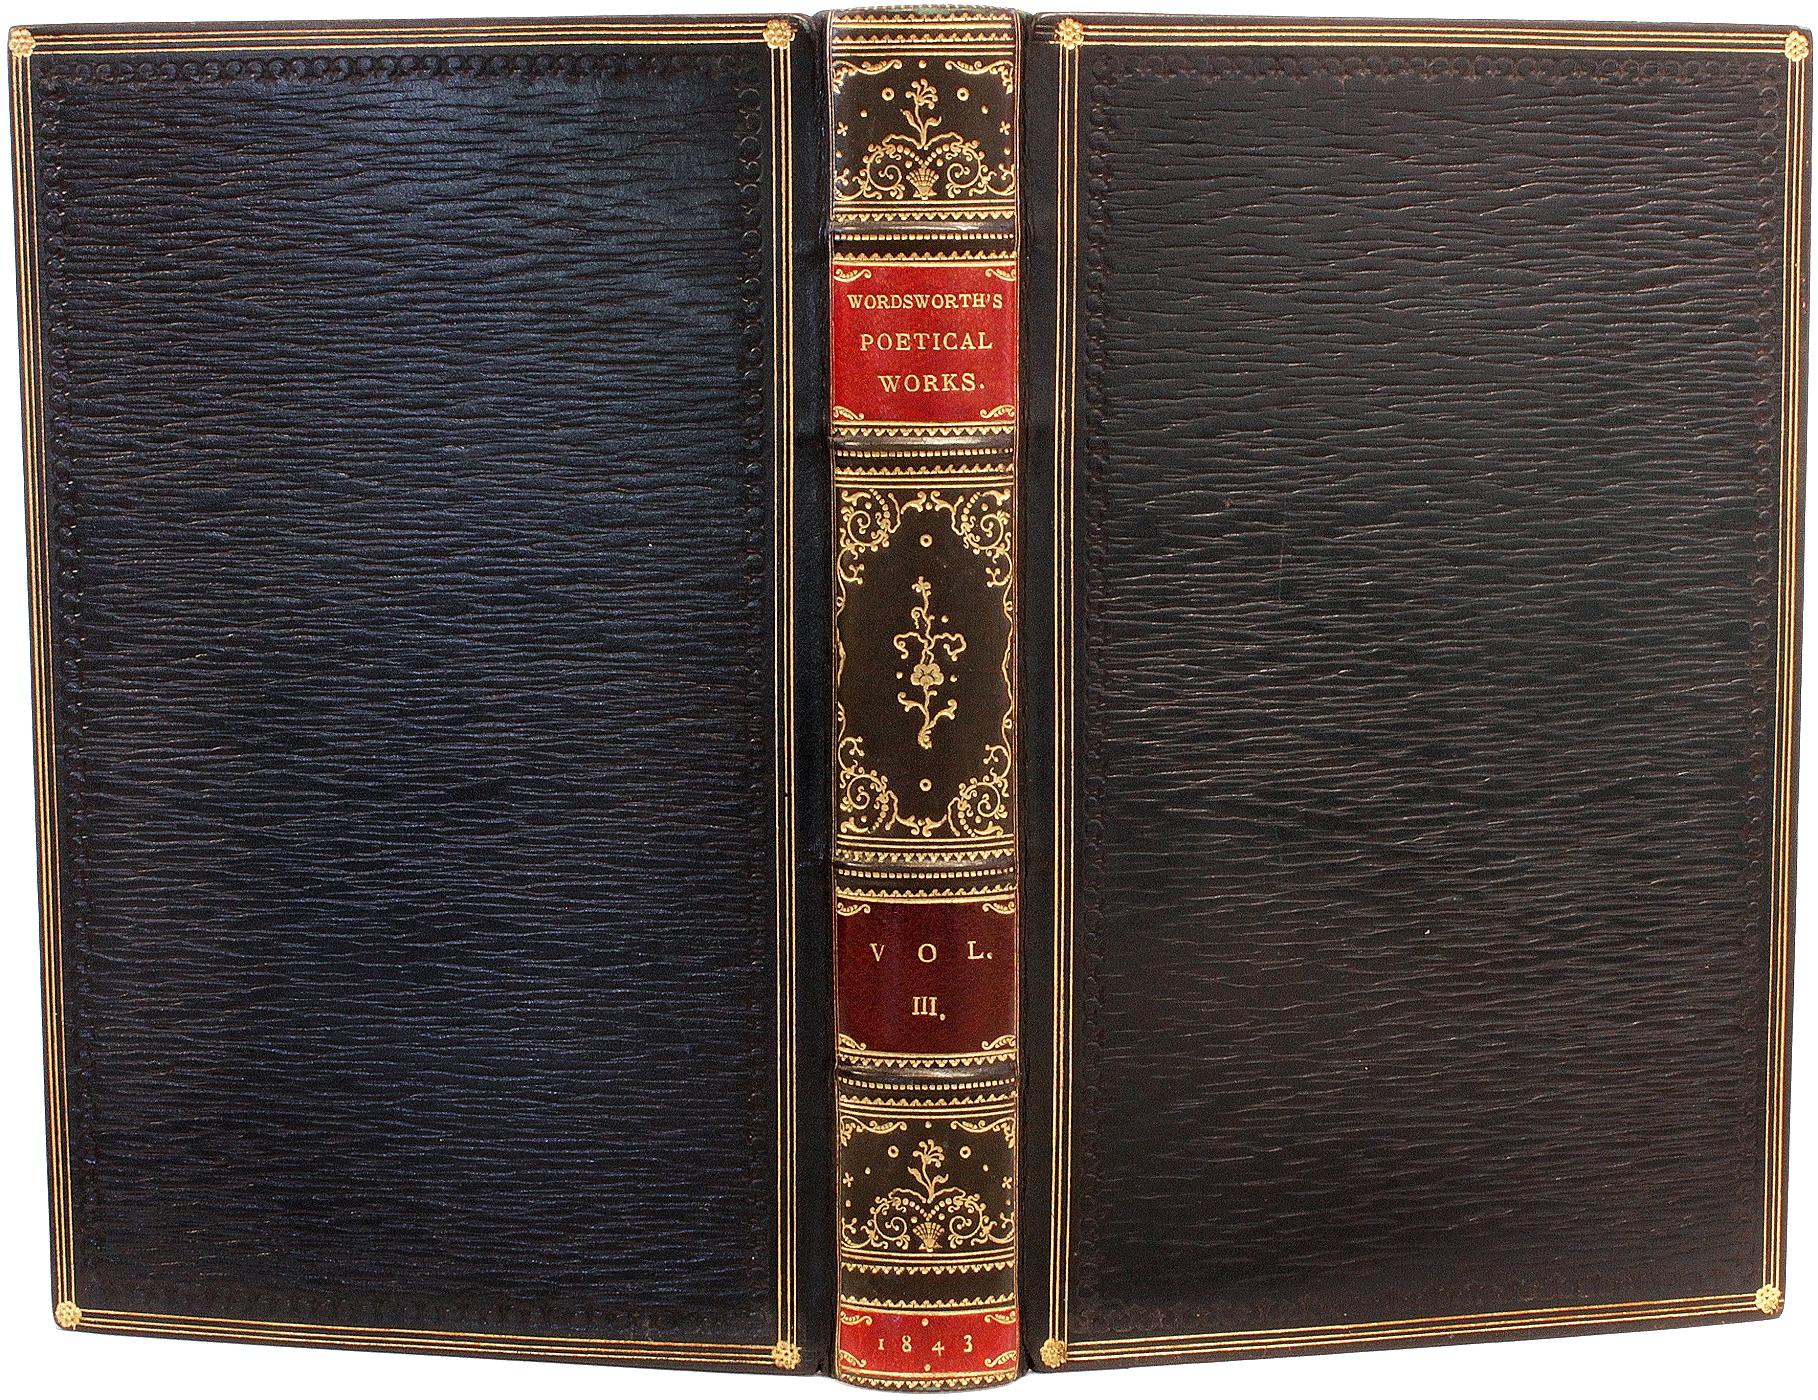 British Poetical Works of William Wordsworth - 7 vols. - IN A FINE FULL LEATHER BINDING For Sale